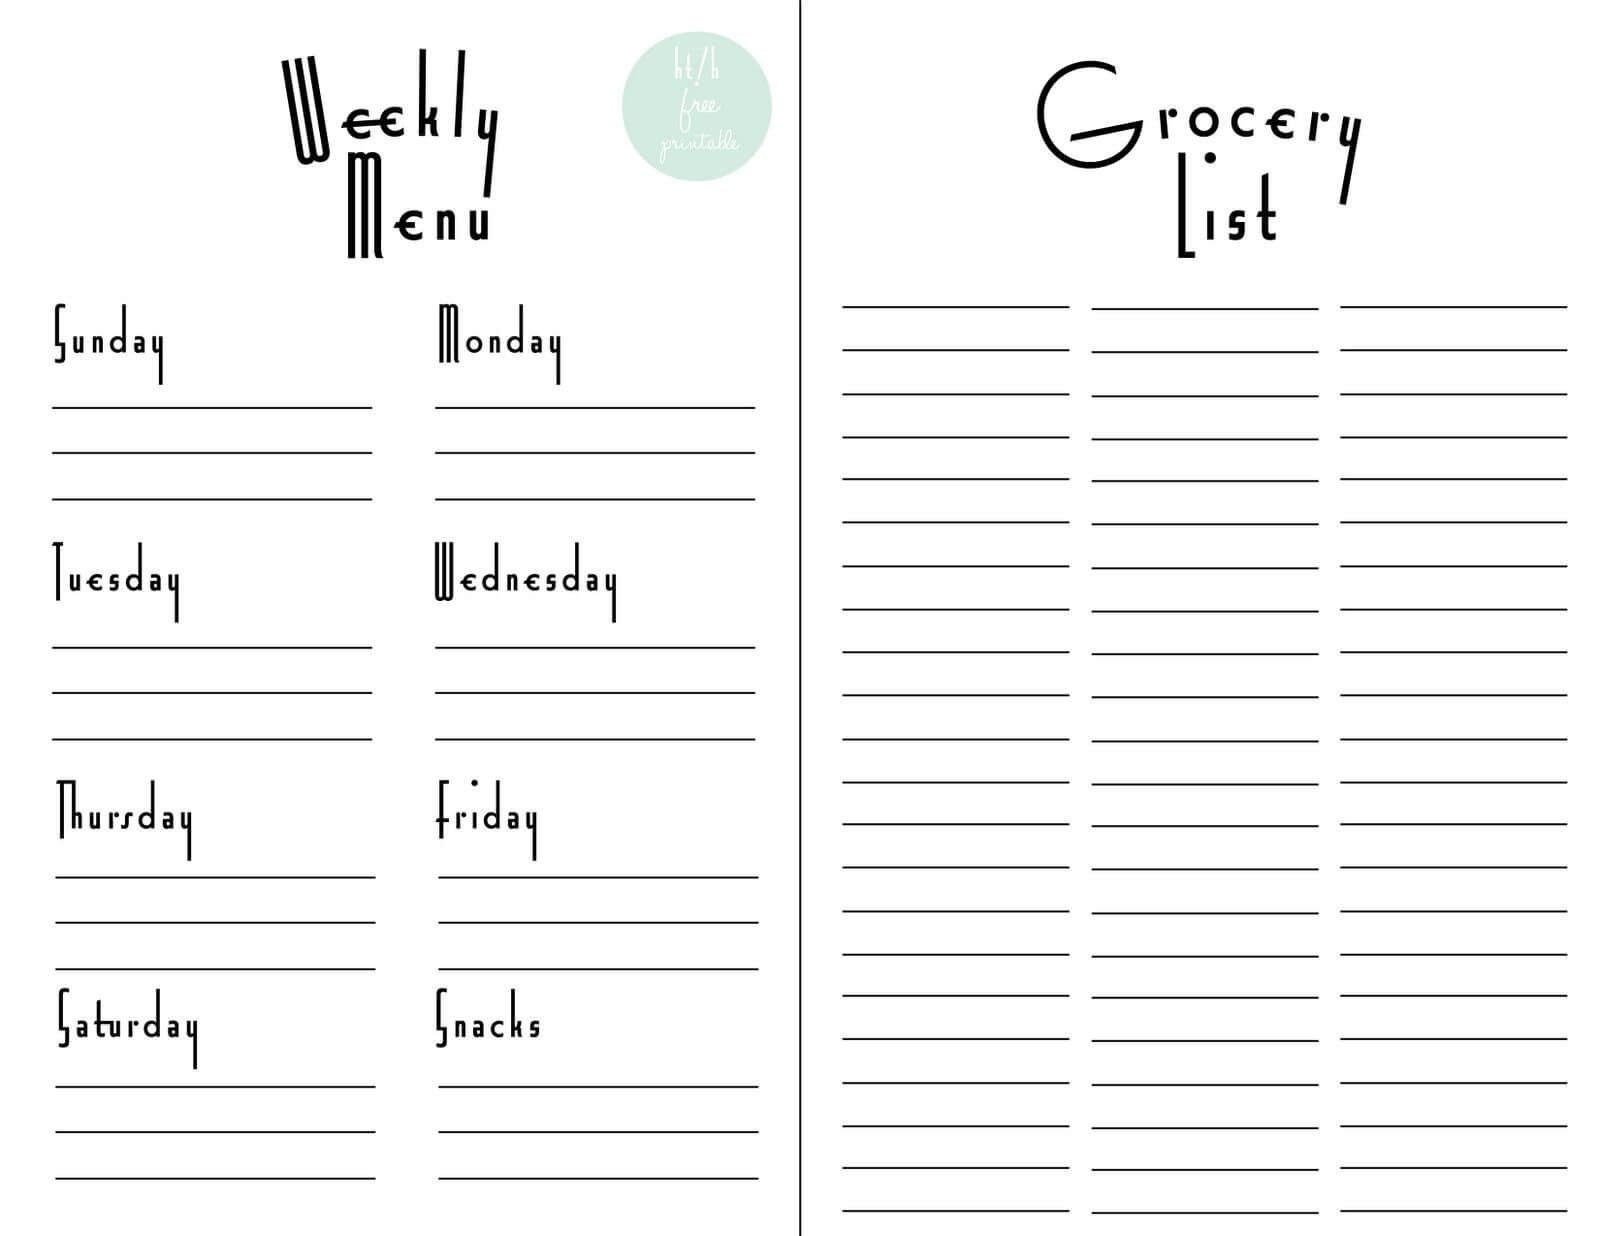 Grocery List Template Excel | Glendale Community Throughout Christmas Card List Template